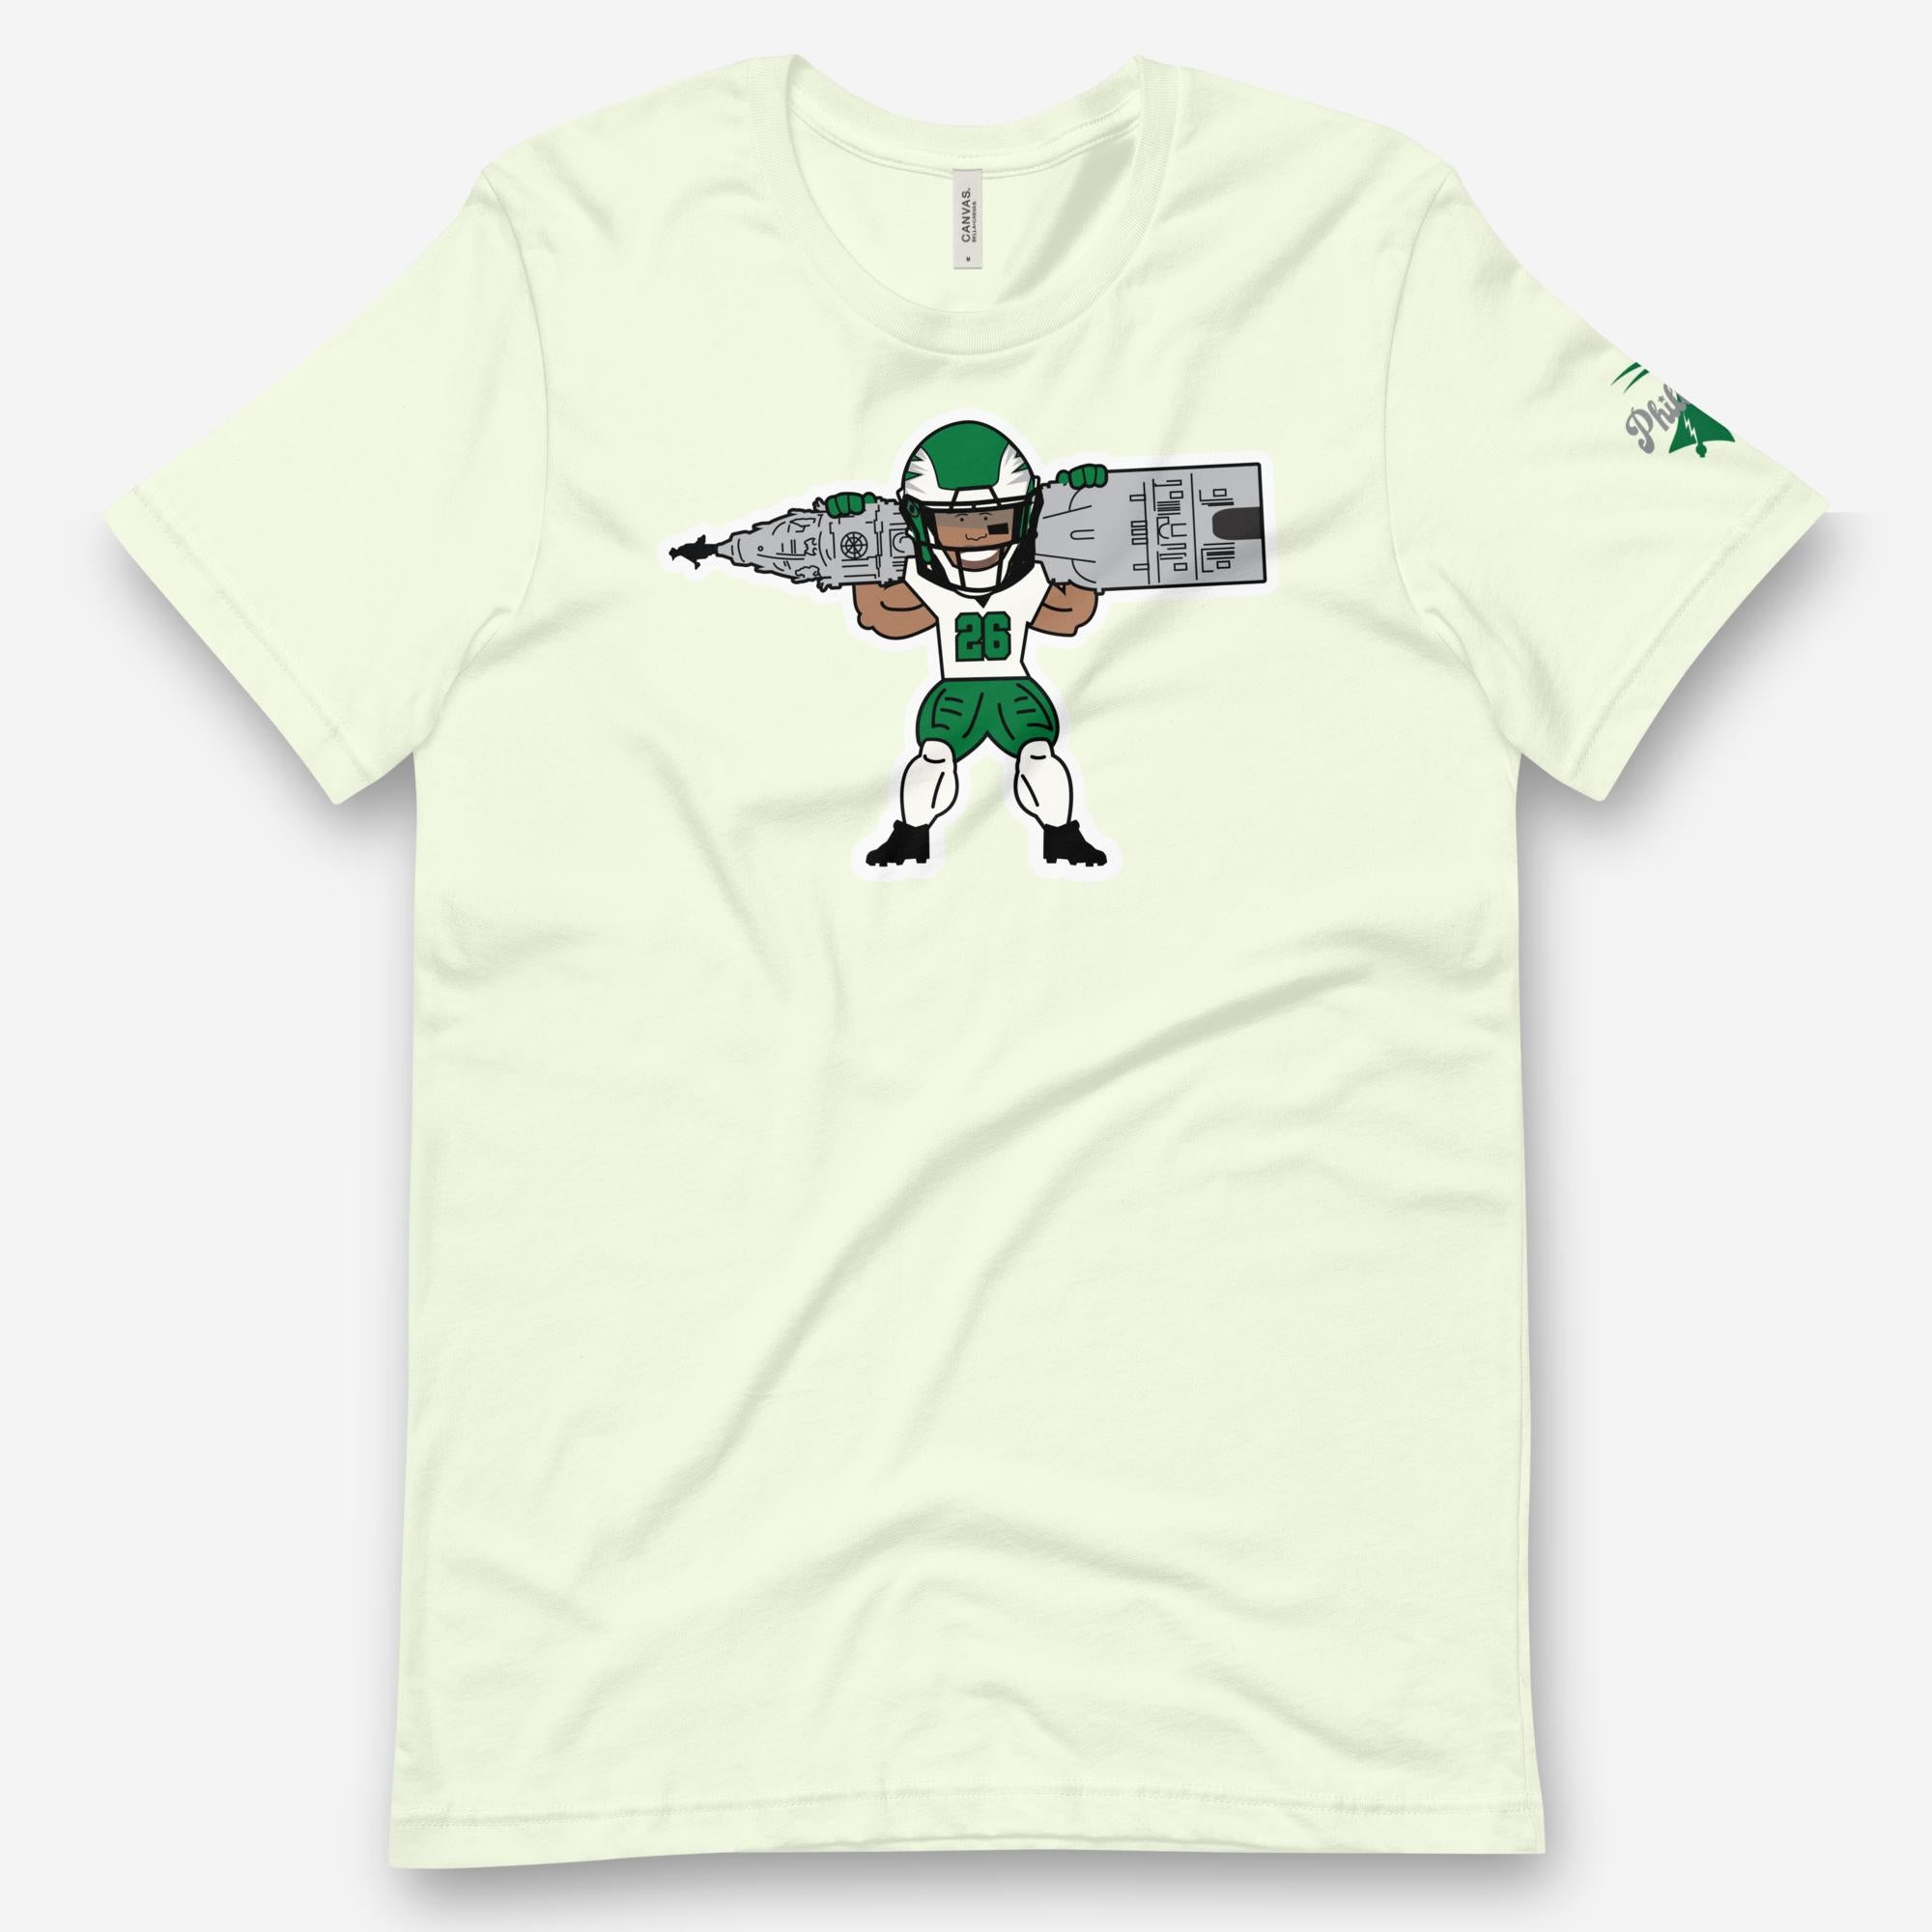 "Philly Squat" Tee